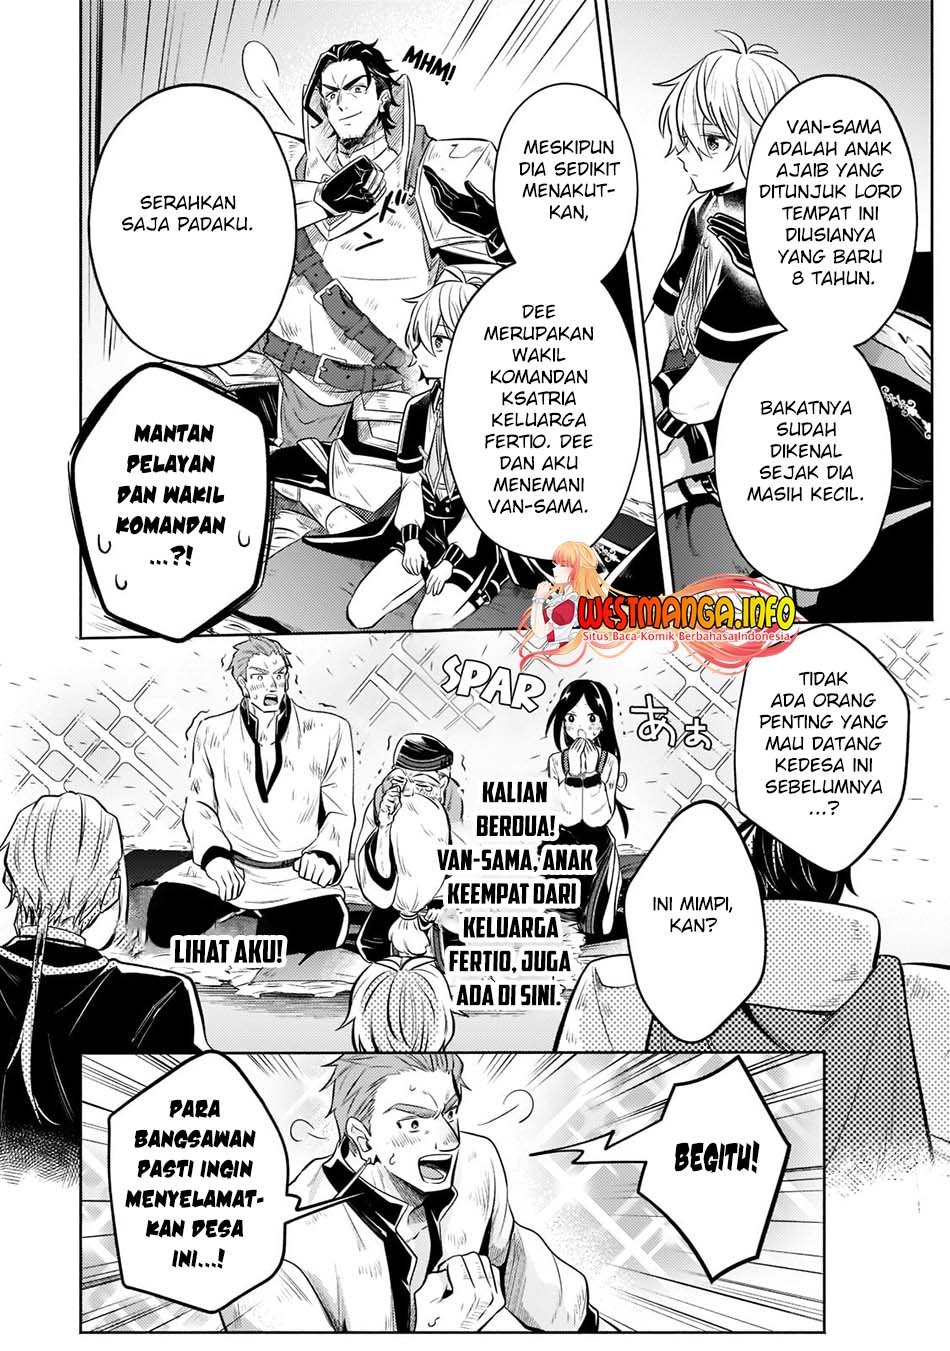 Fun Territory Defense Of The Easy-Going Lord ~The Nameless Village Is Made Into The Strongest Fortified City By Production Magic~ Chapter 07 - 197